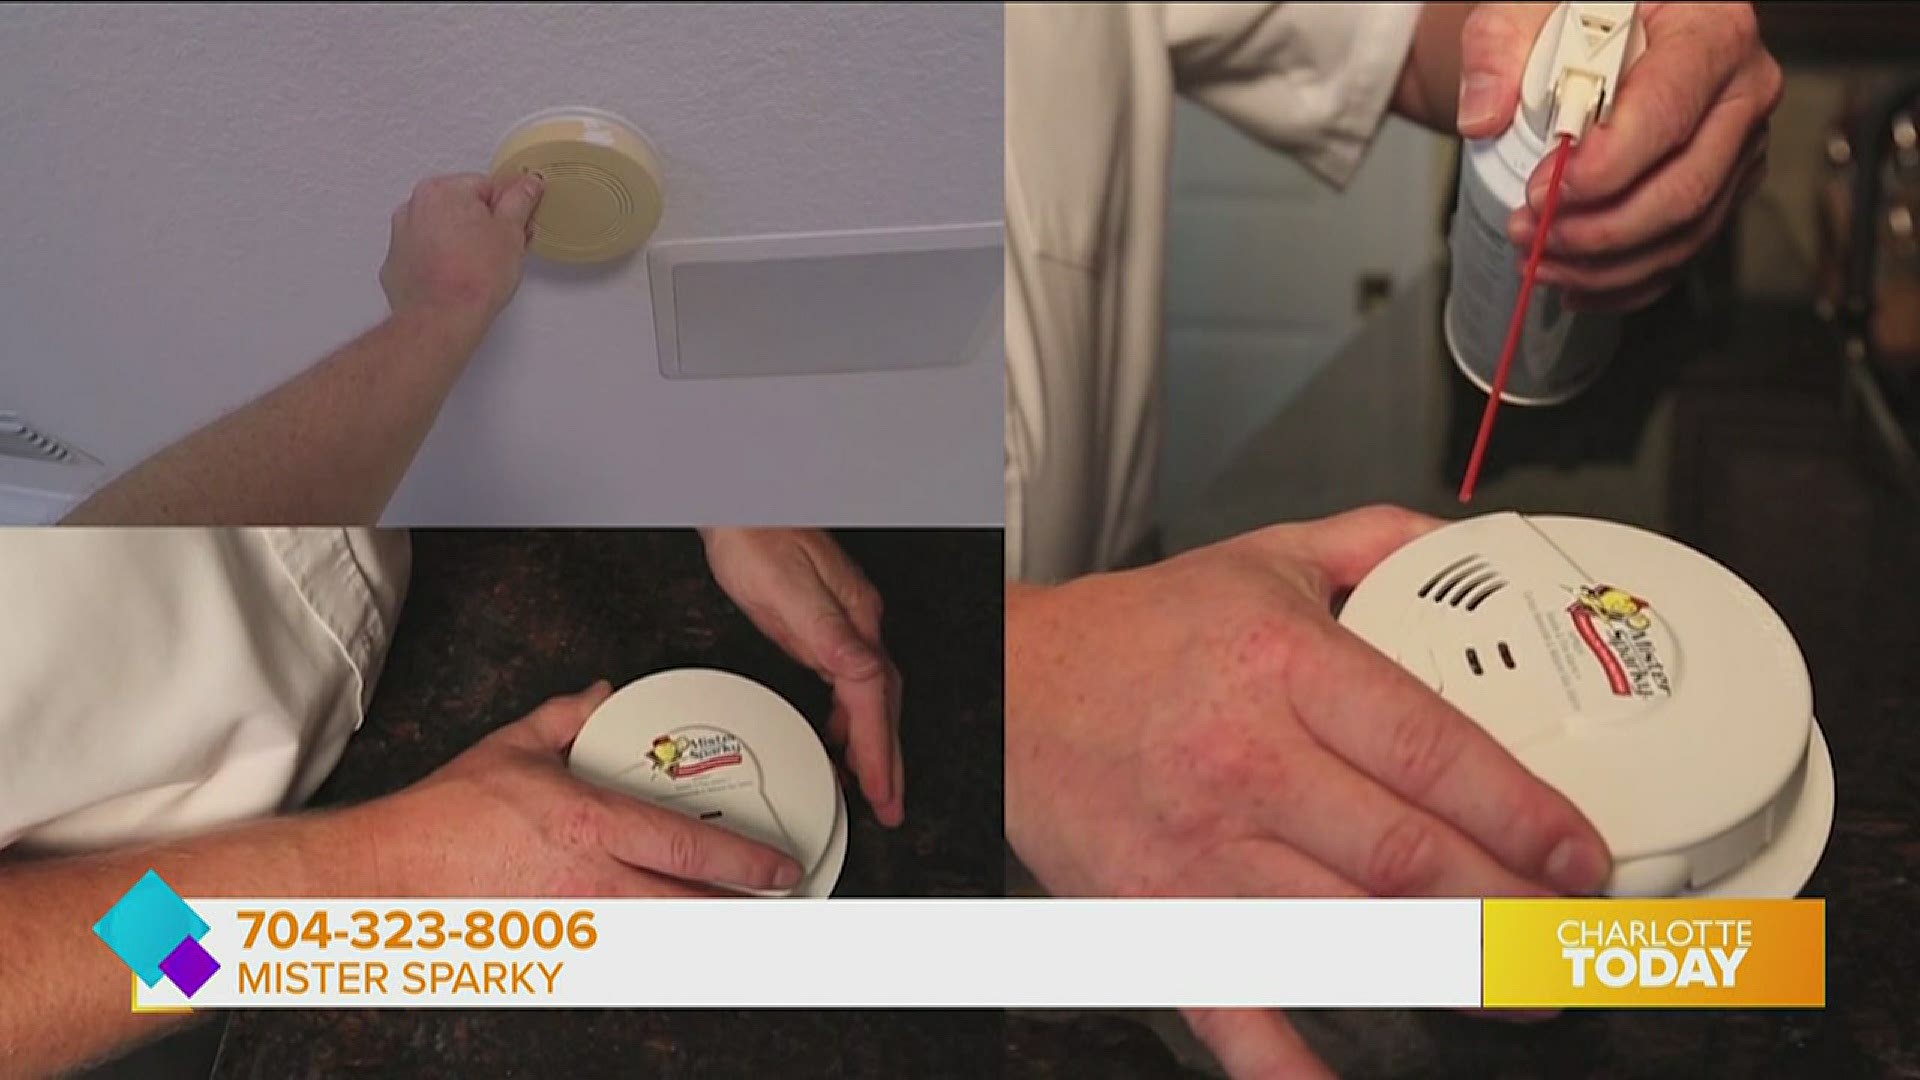 Mister Sparky tells us how to be aware of an electrical emergency